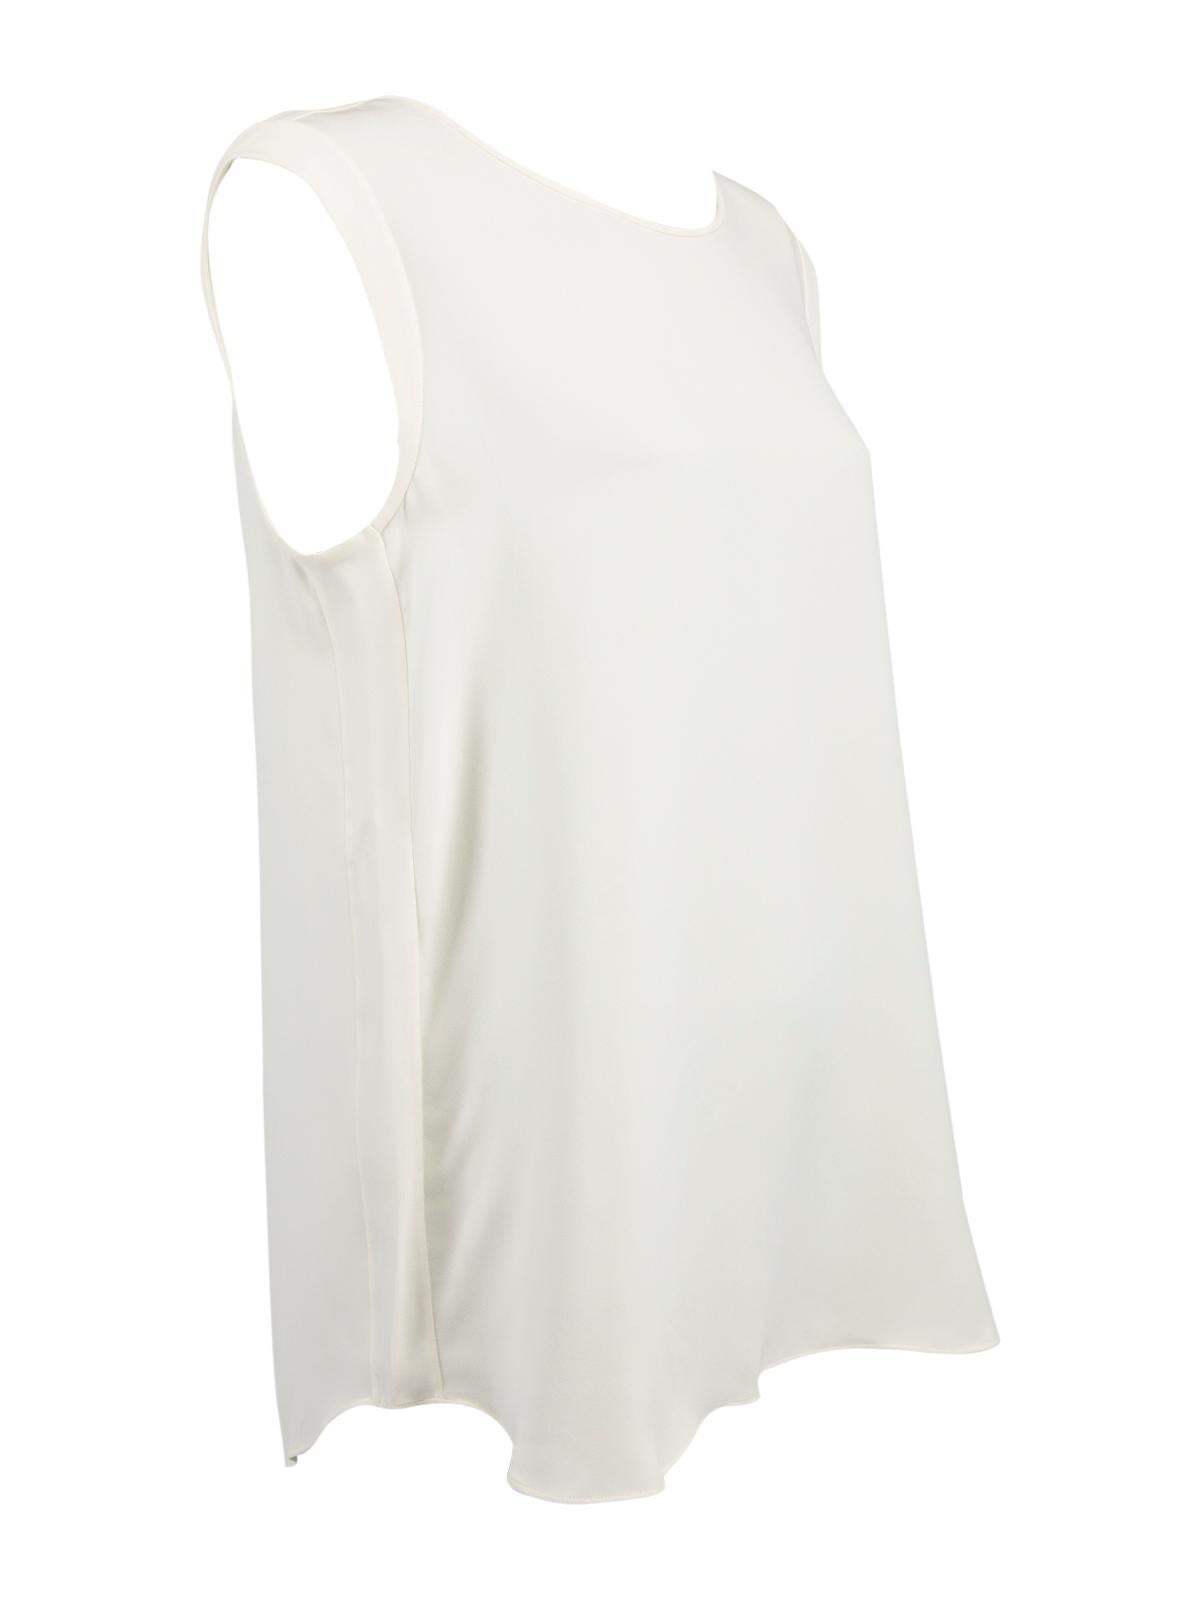 CONDITION is Very good. Hardly any visible wear to blouse is evident on this used Loro Piana designer resale item. Details White Silk Sleeveless Loose fit Round neck Slip on fastening Made in Italy Composition 100% Silk Care instructions: